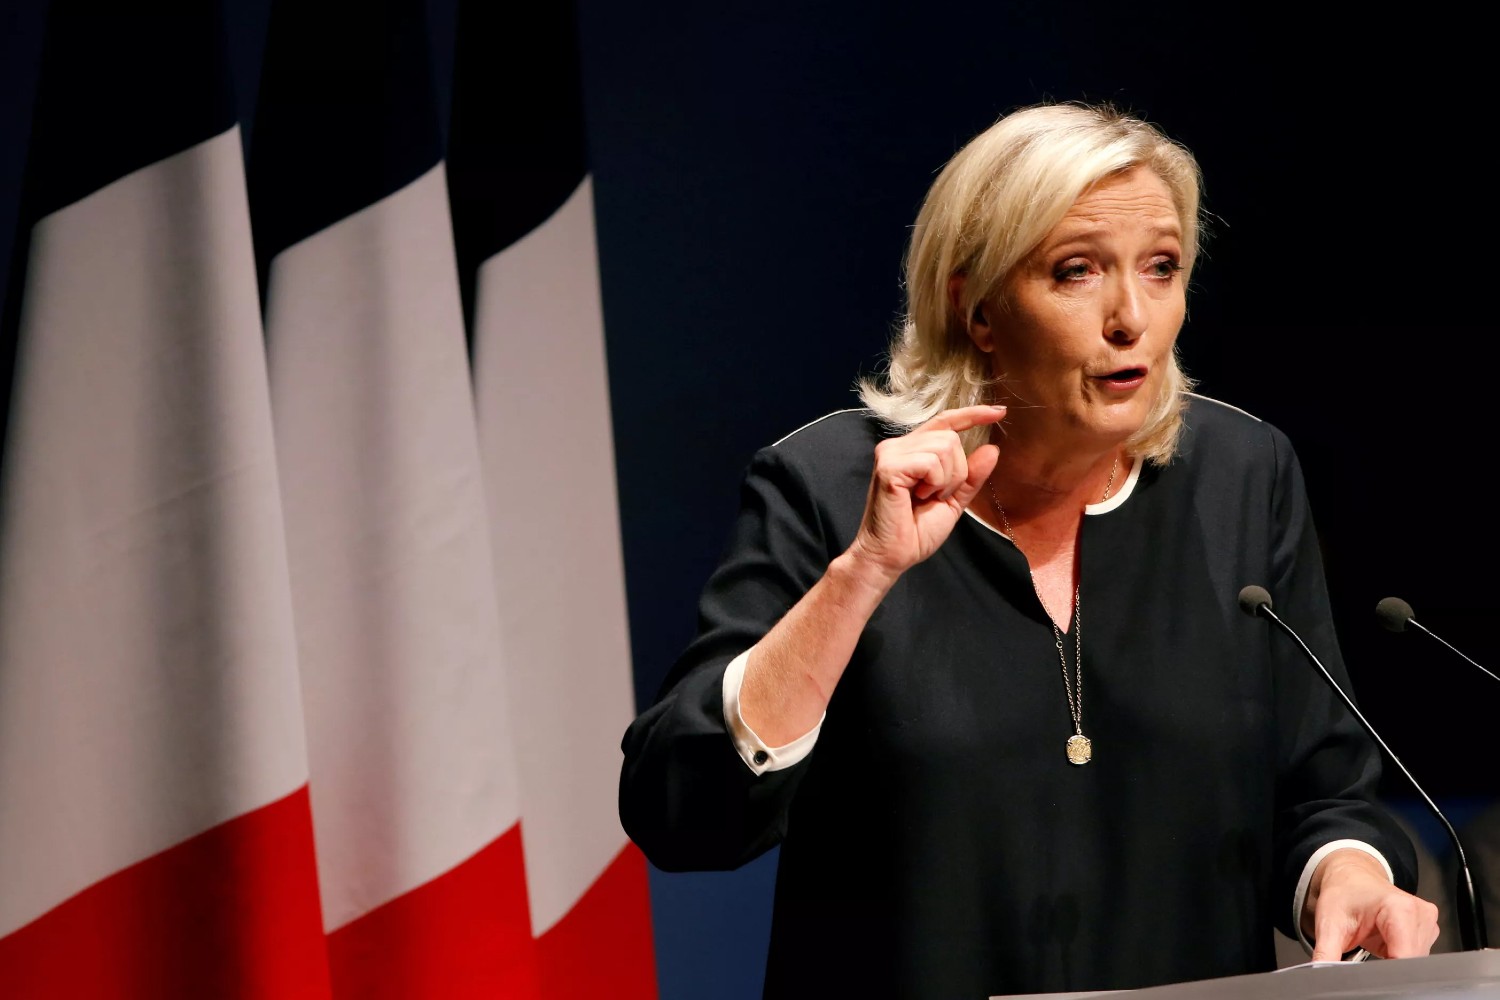 France's far-right leader Marine Le Pen delivers a speech for the next year's municipal elections in an end-summer annual address to partisans in Frejus, France September 15, 2019. REUTERS/Jean-Paul Pelissier/File Photo